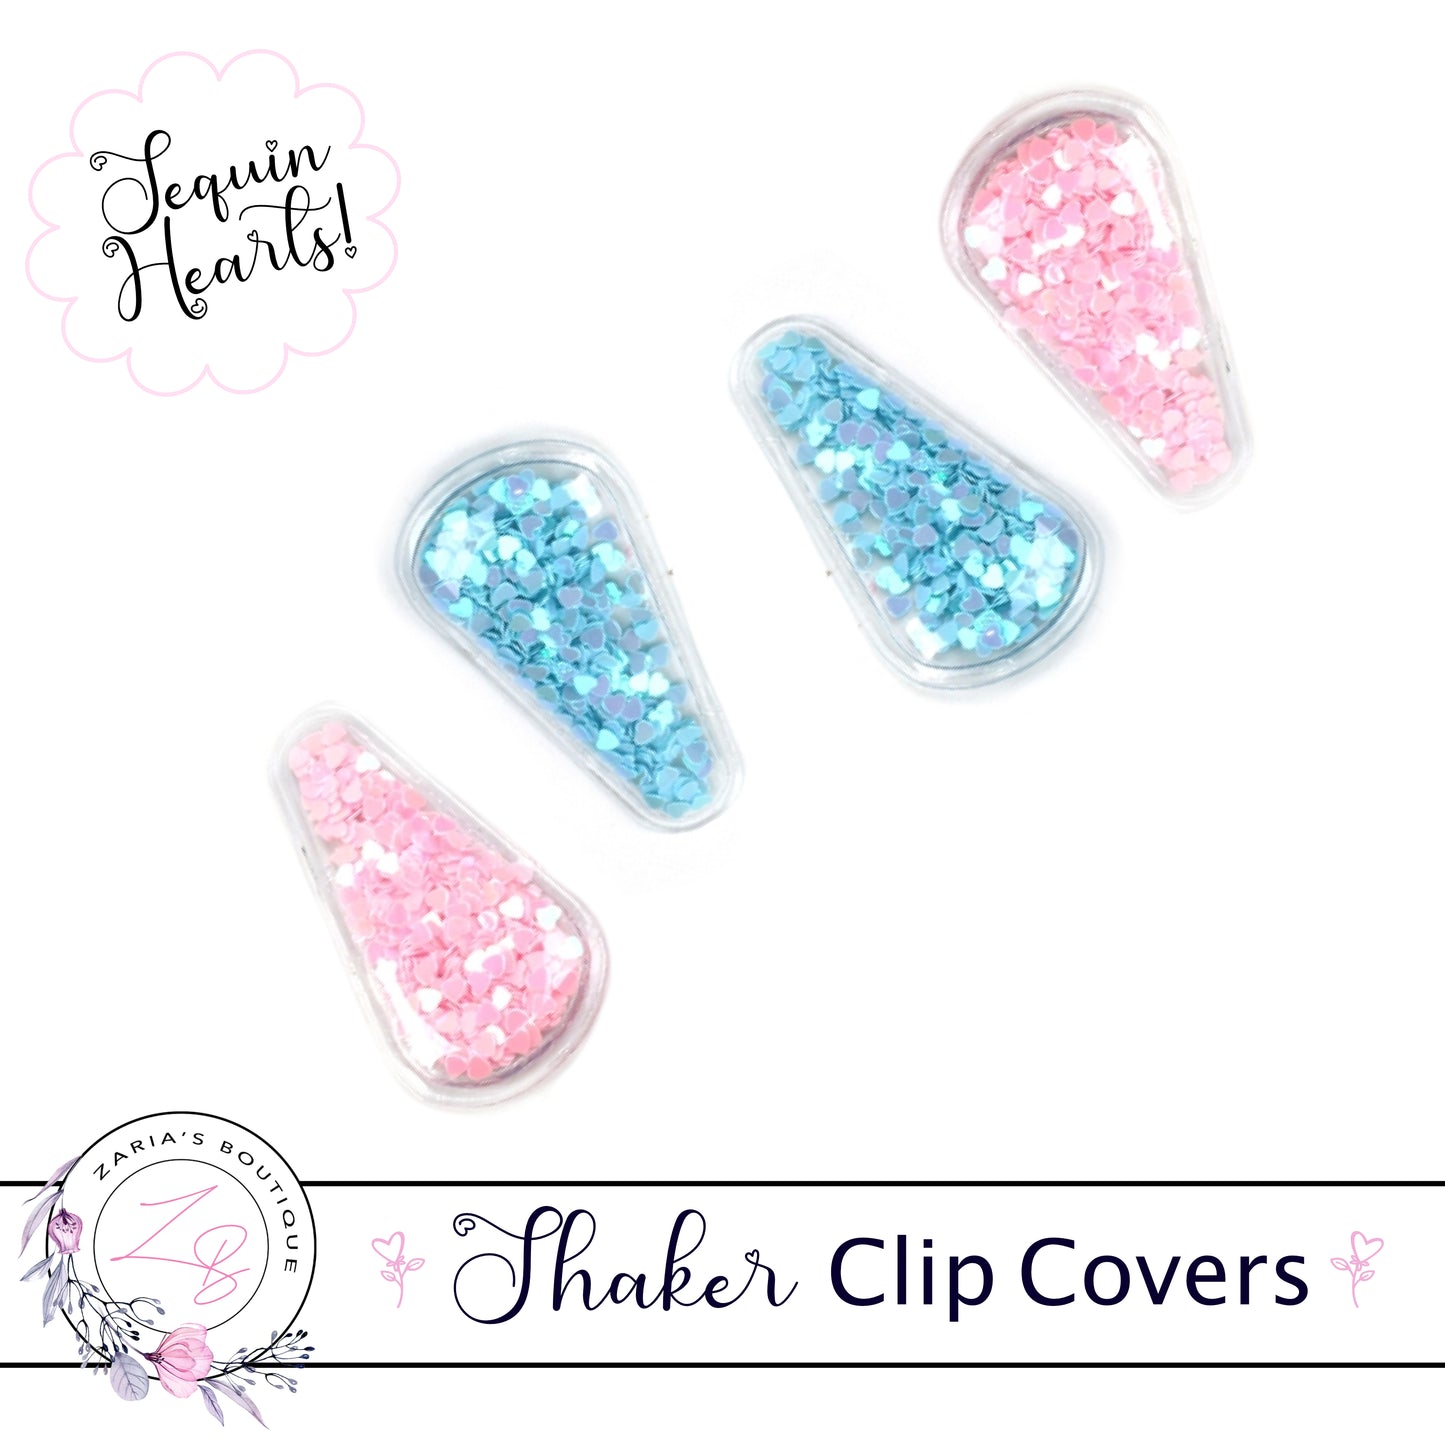 ⋅ Sequin Hearts ⋅ Shaker Snap Clip Covers ⋅ Pack of 2 ⋅ Pink & Blue